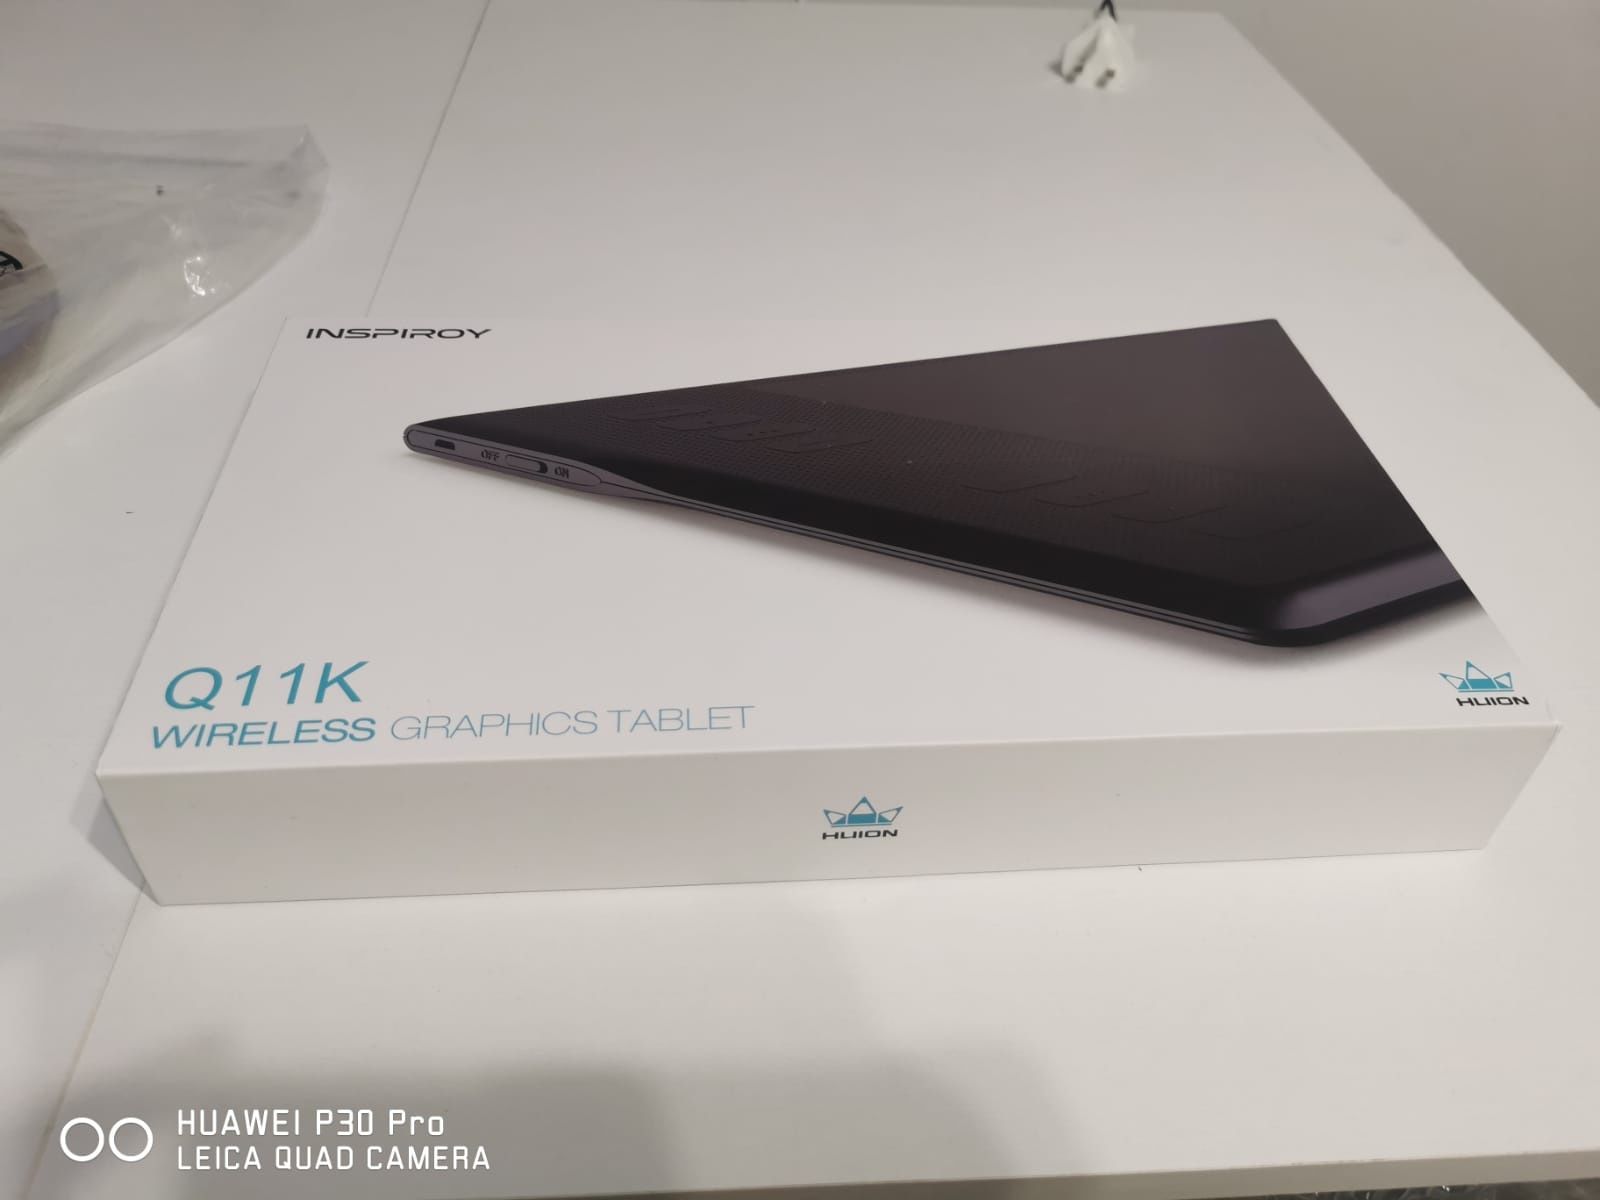 Wireless Graphics tablet